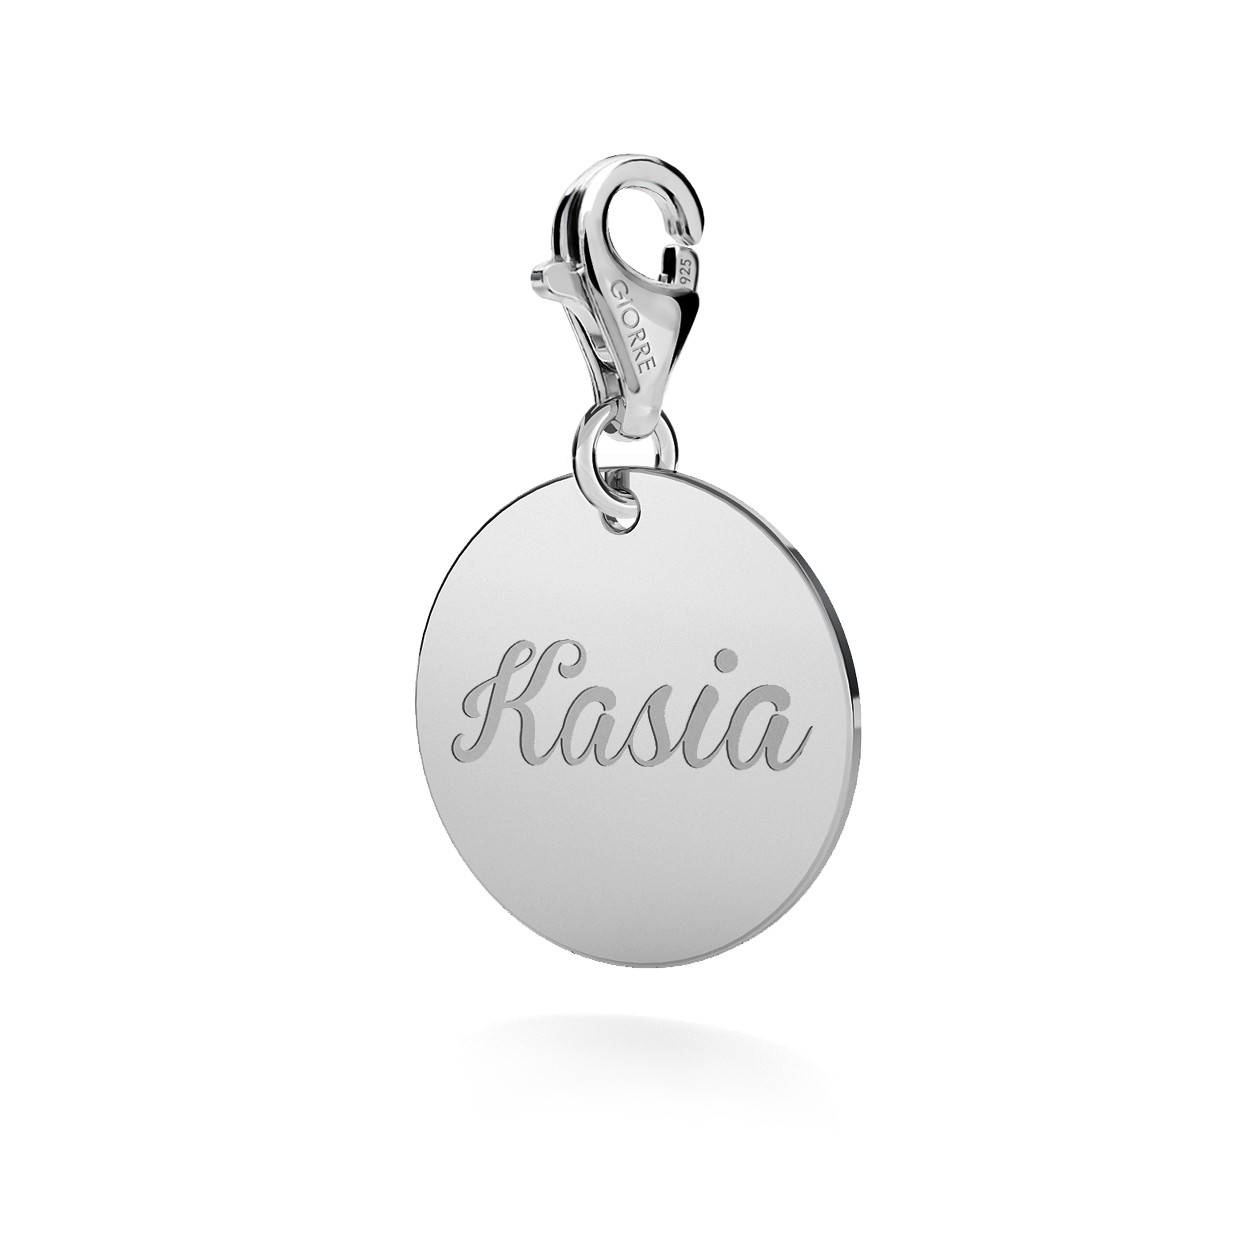 CHARM WITH ENGRAVE, RING, SILVER 925, RHODIUM OR GOLD PLATED